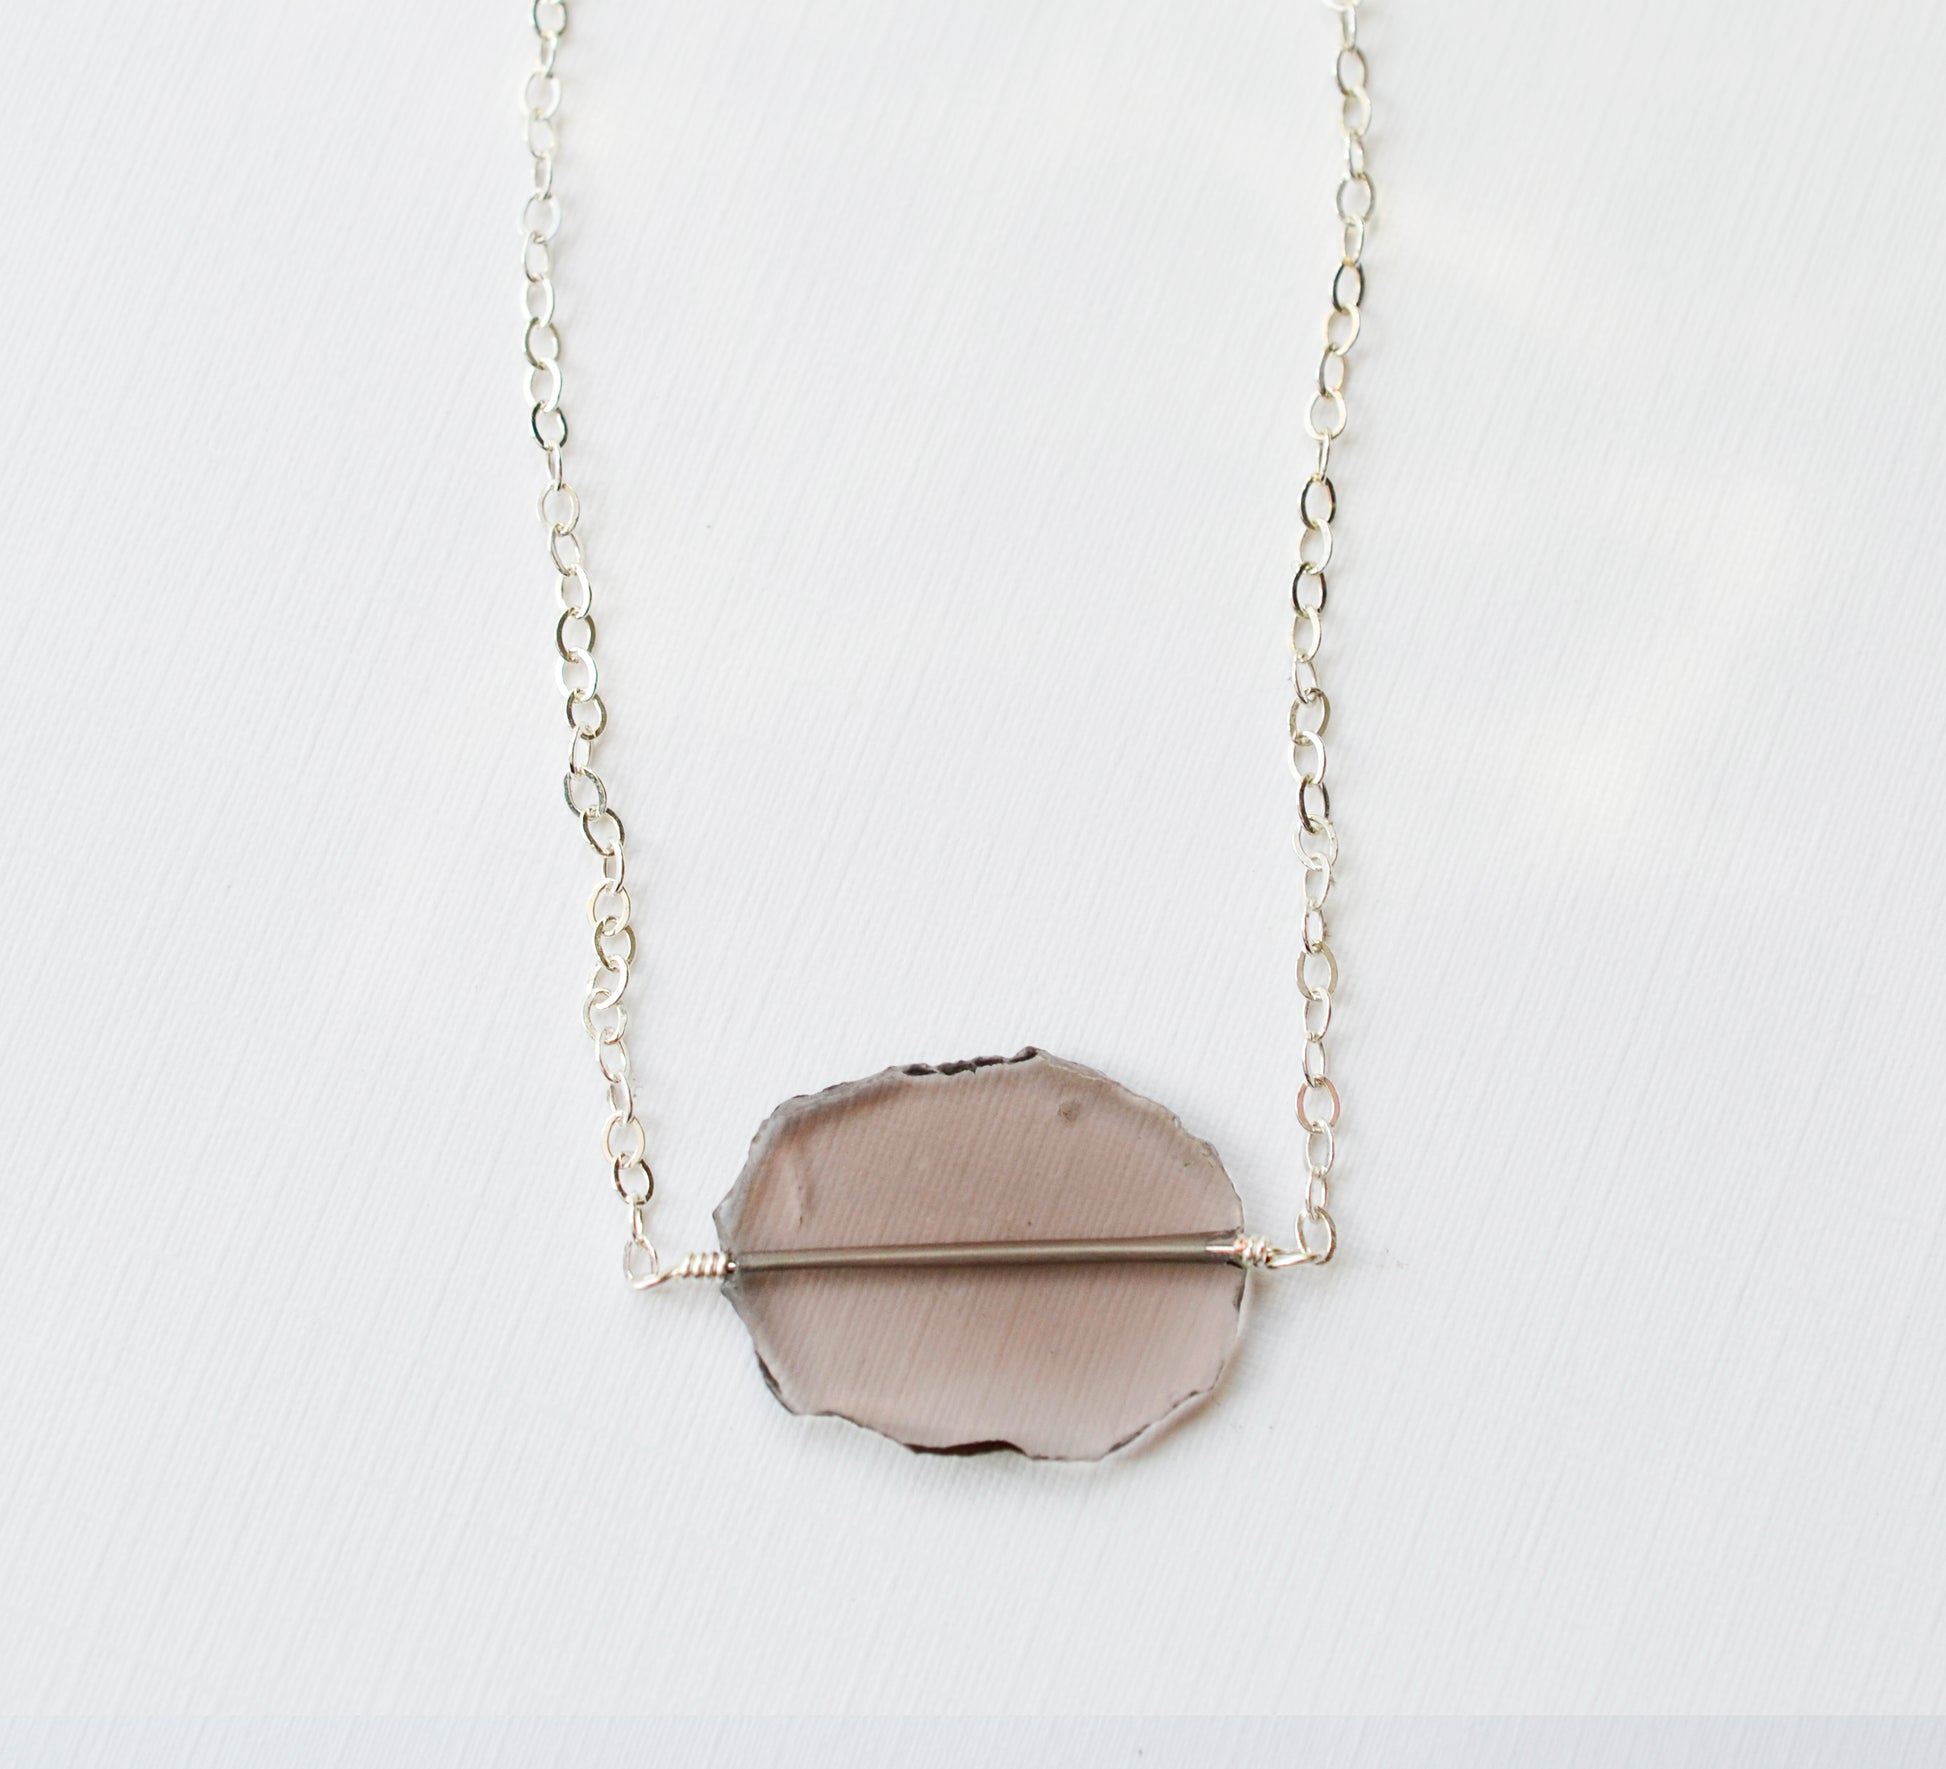 An irregular oval shape, smooth polished Smokey Quartz stone set onto a 14k gold filled chain. The stones edges are raw and irregular. The stone is mostly clear and may show natural inclusions.